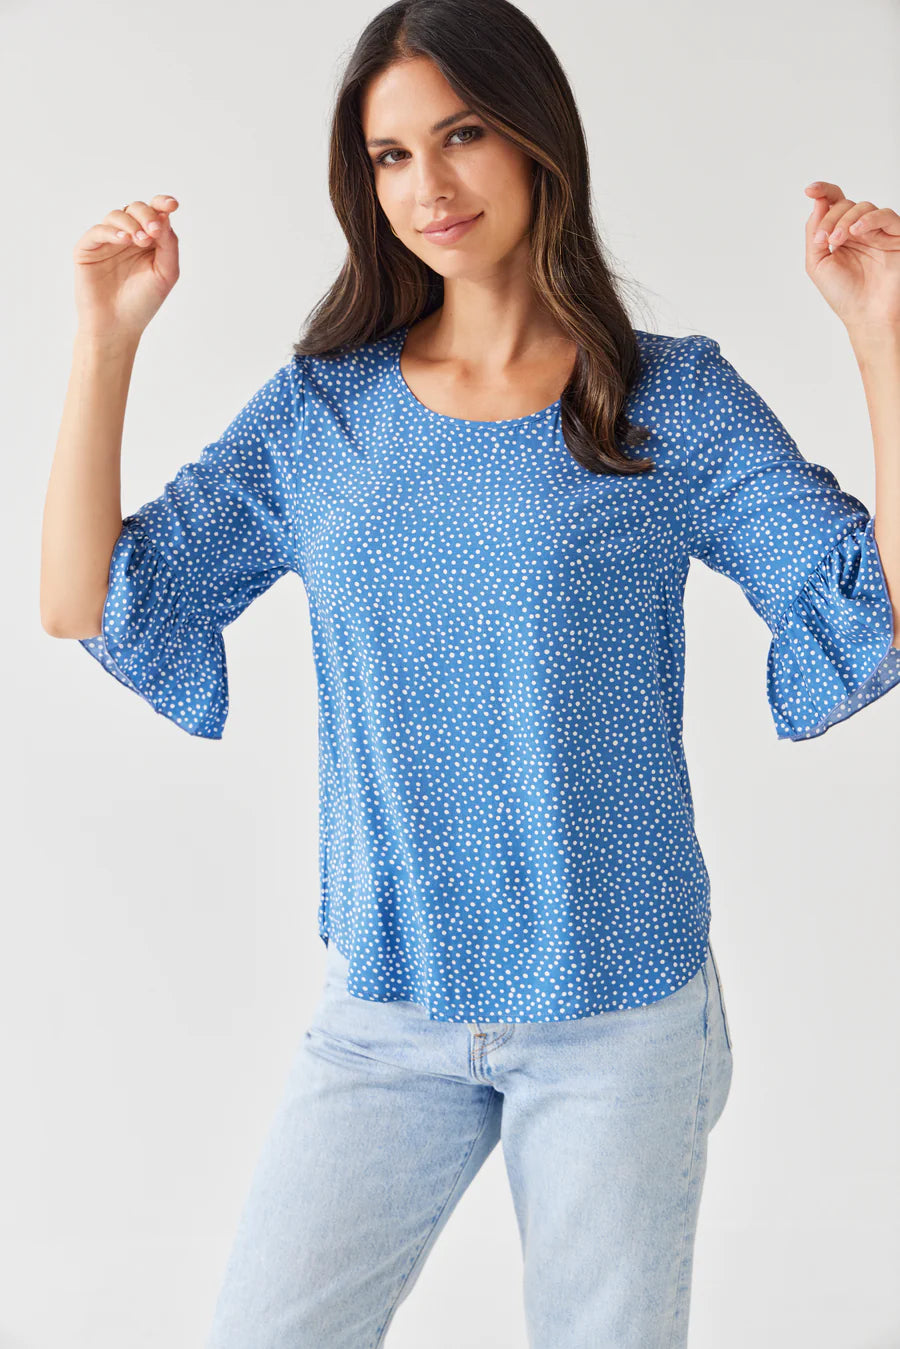 TUESDAY LABEL - Narelle Top (Blue Polka)